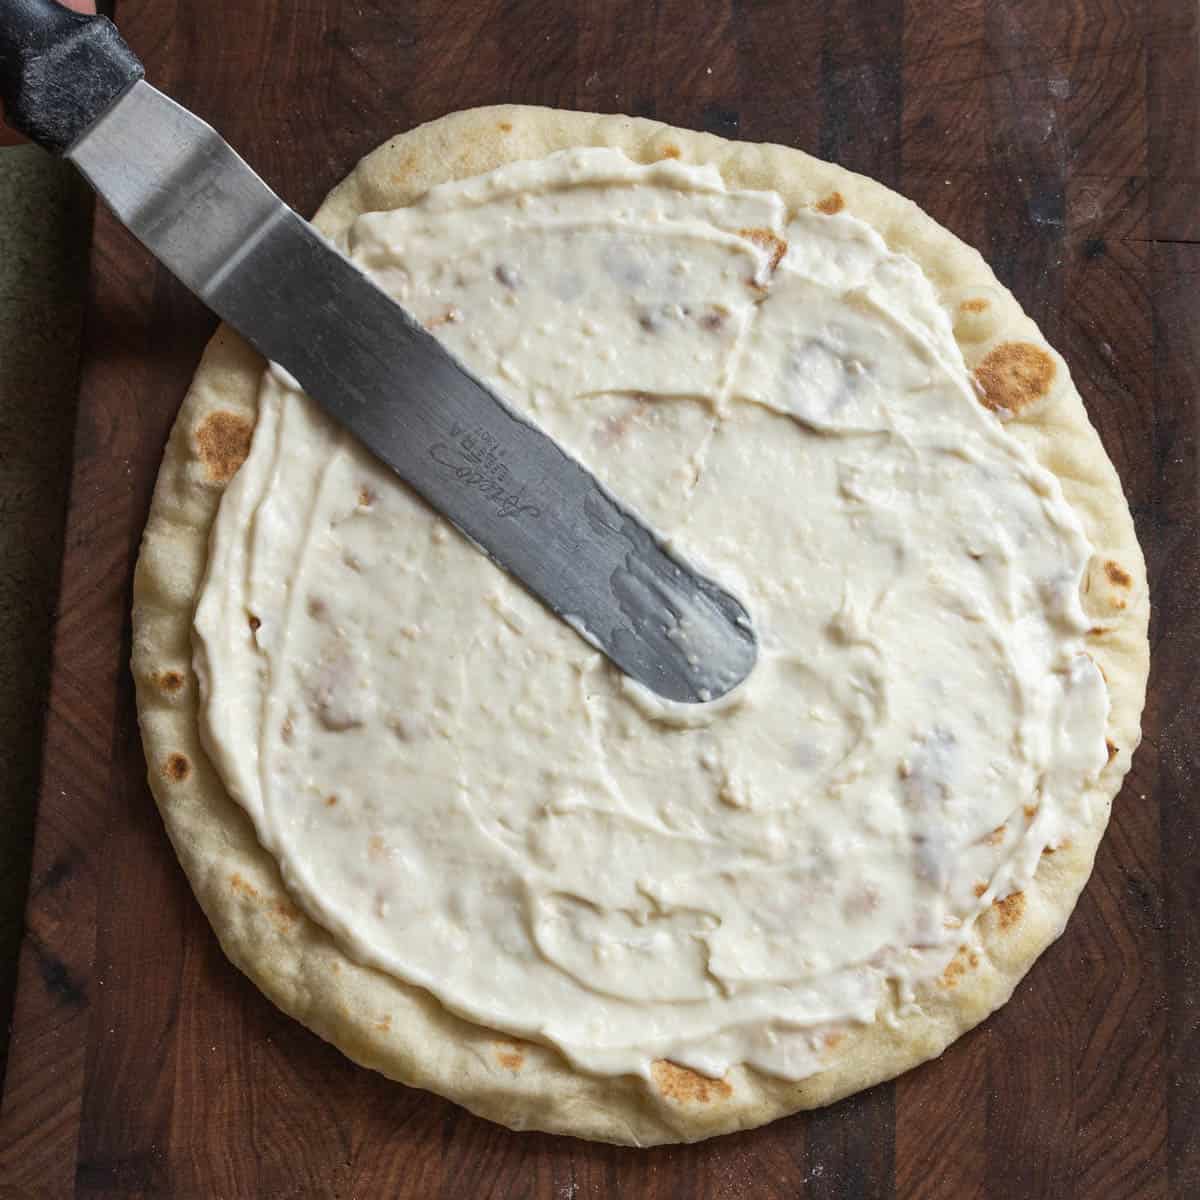 spreading a pizza crust with white sauce